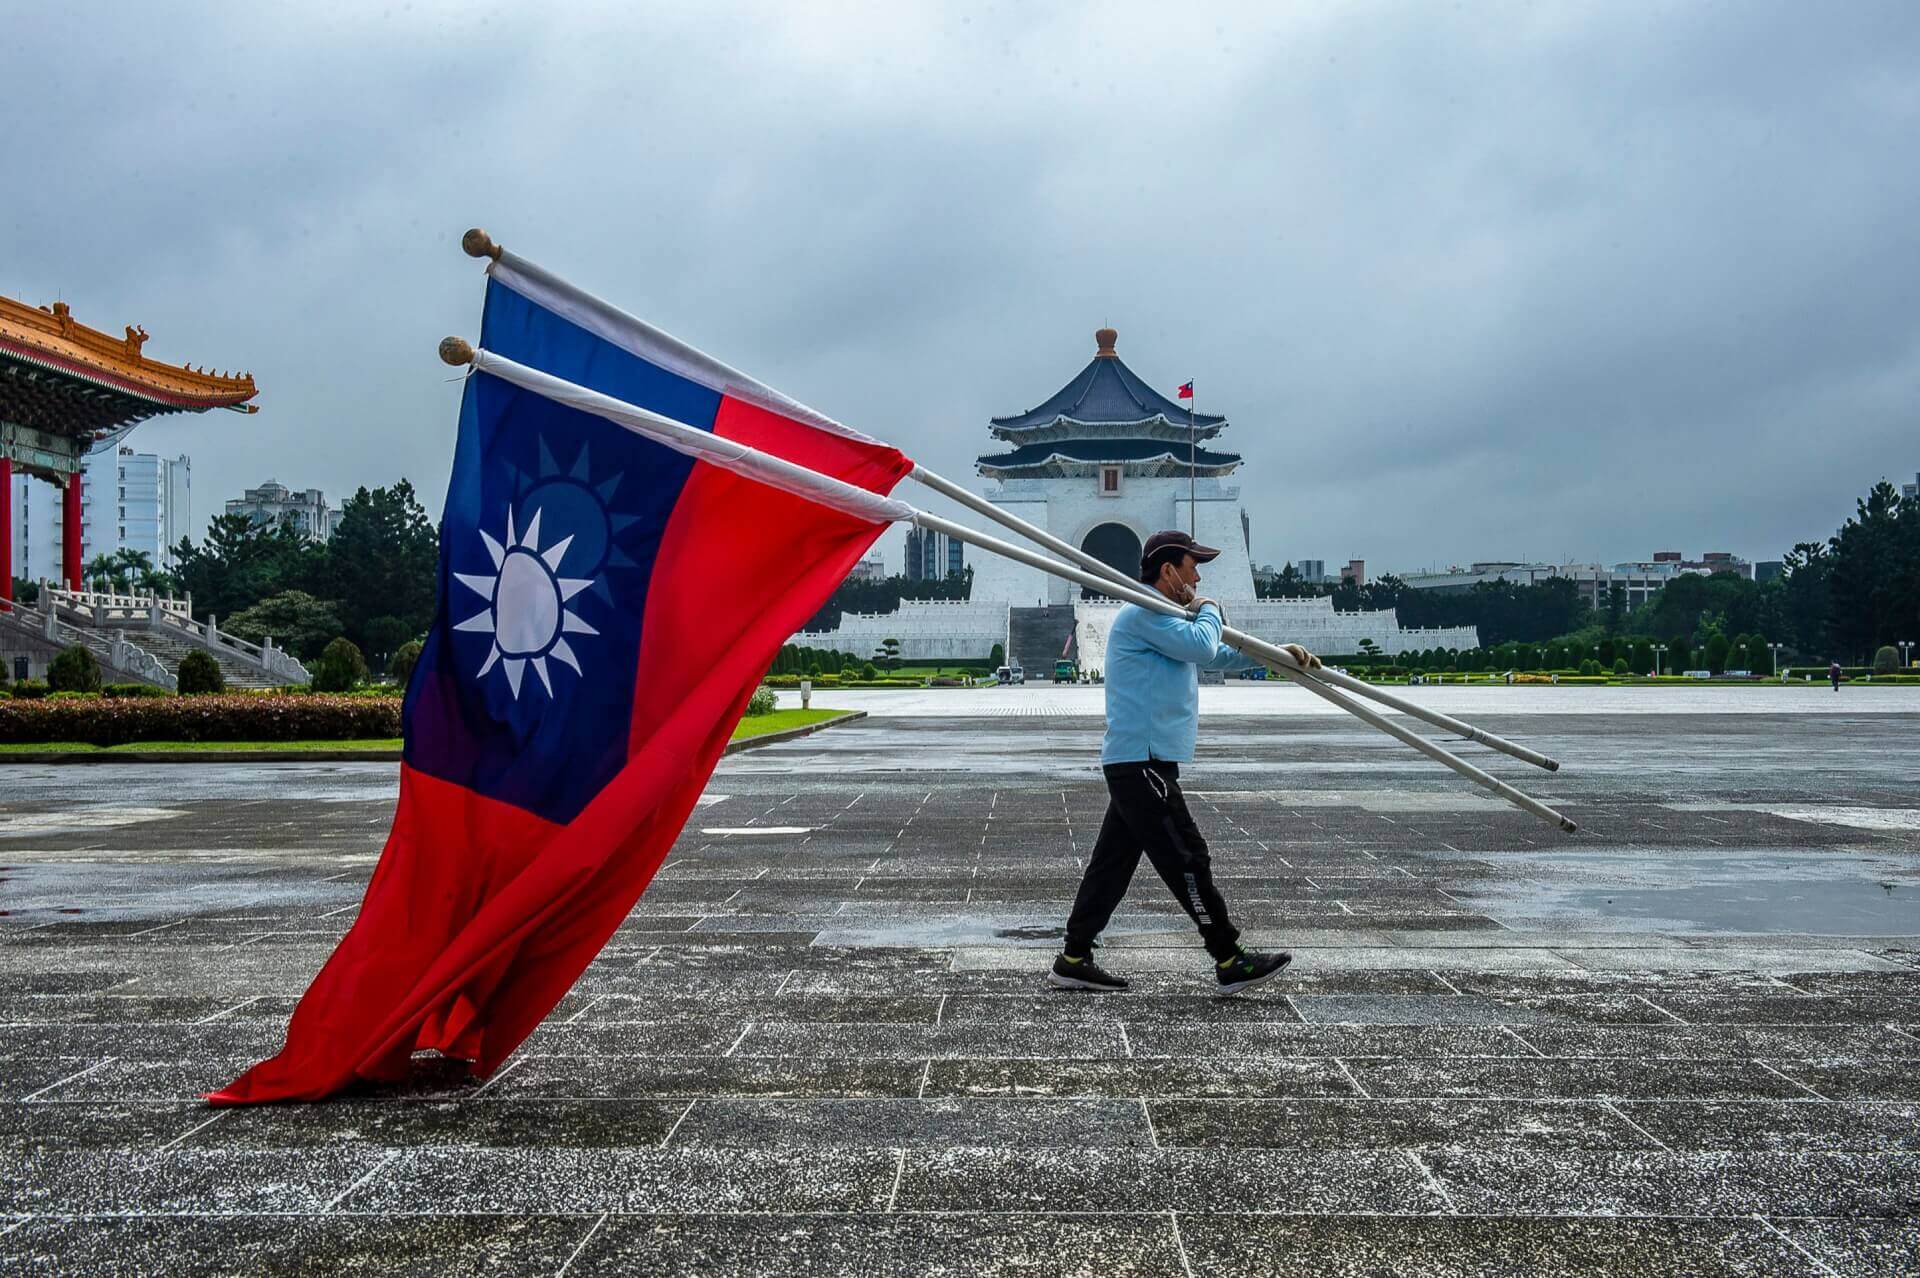 Taiwan Conflict Risks “Cataclysmic World War” Between Nuclear Powers: Report